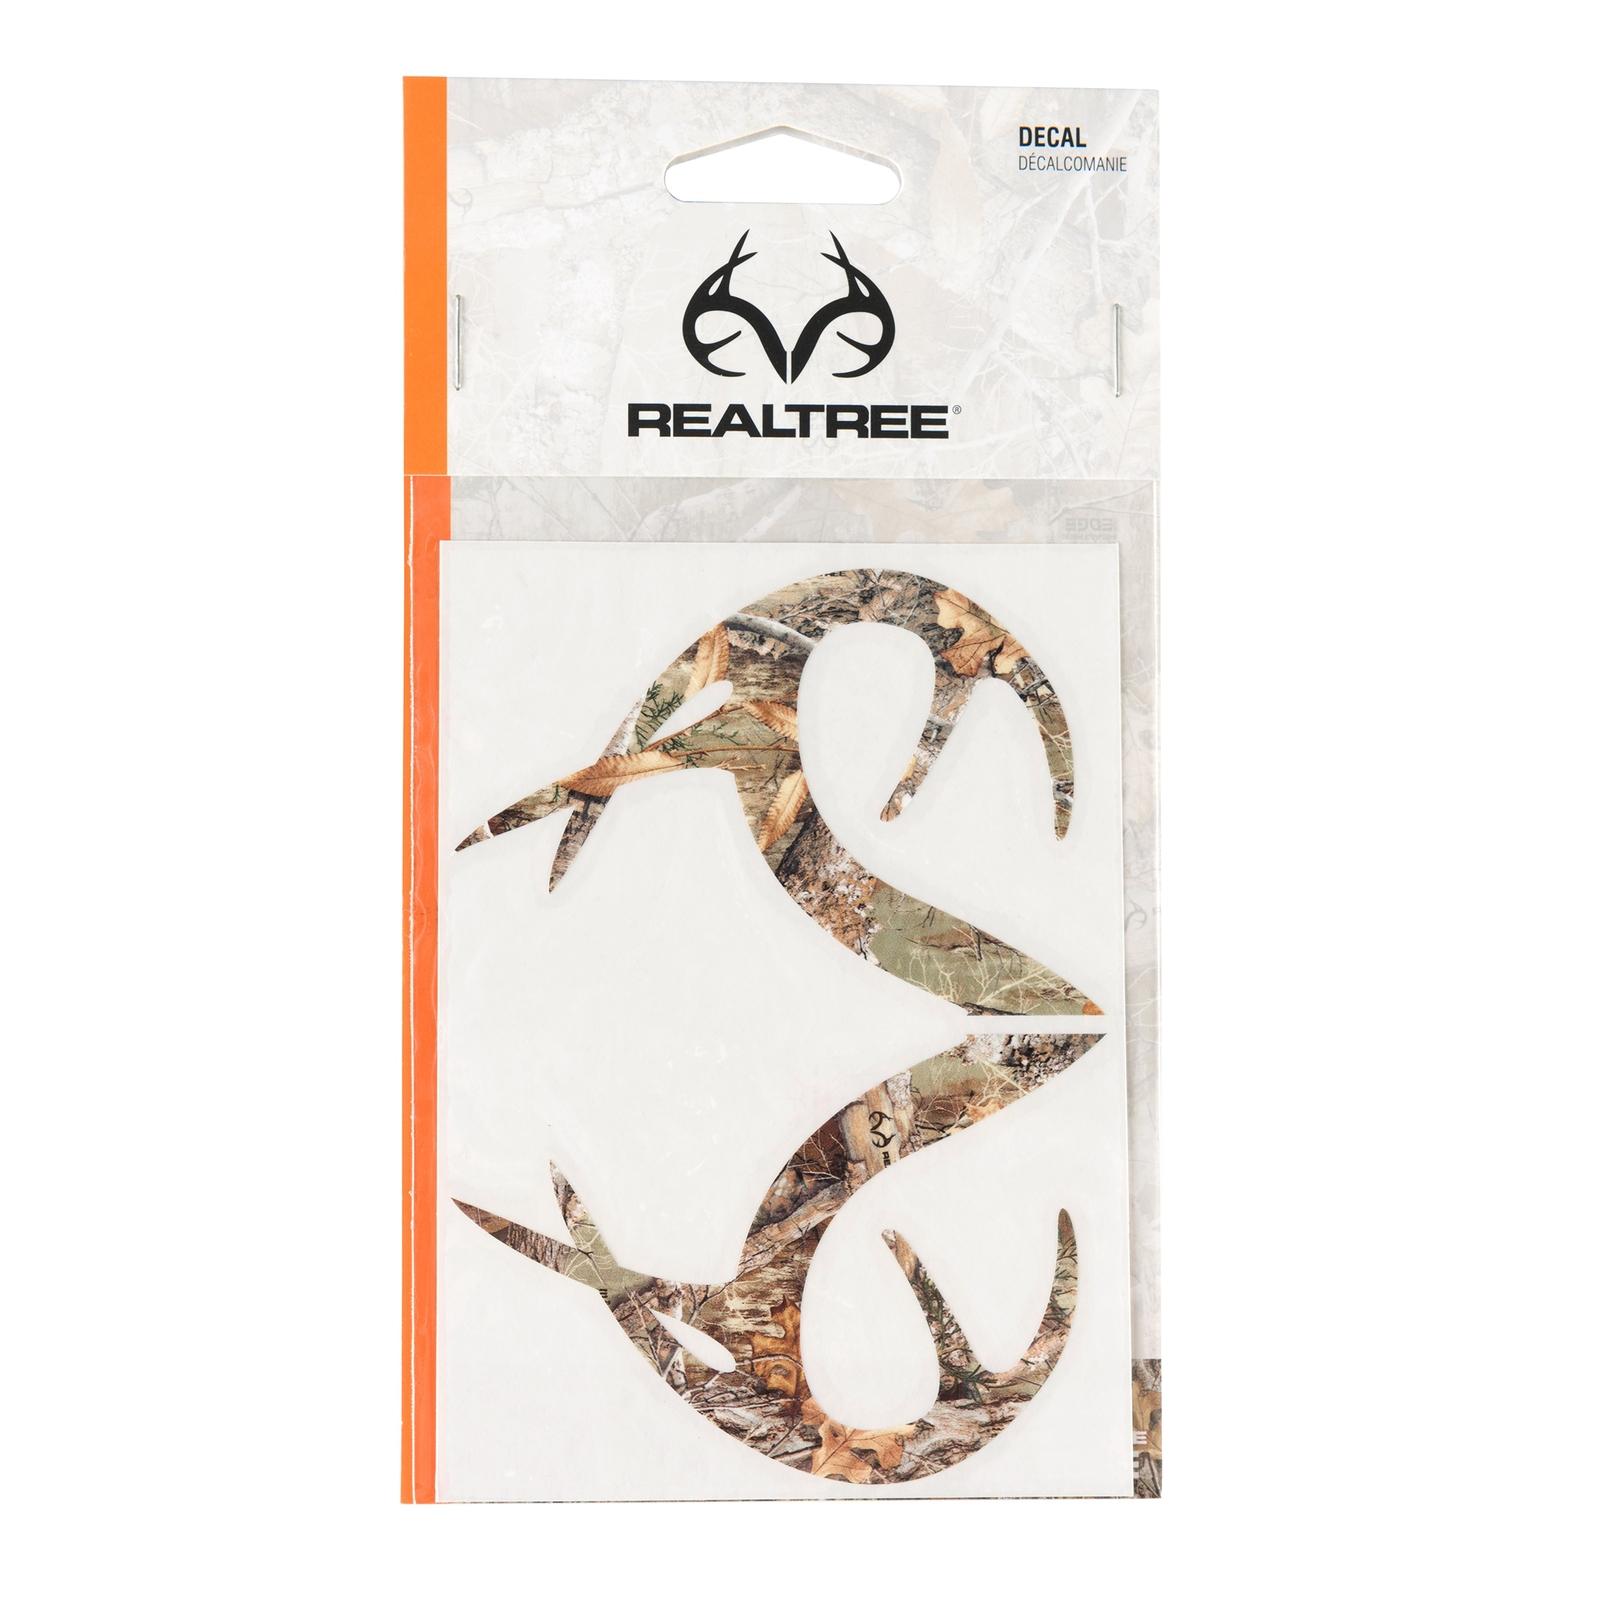 Realtree 6" decal